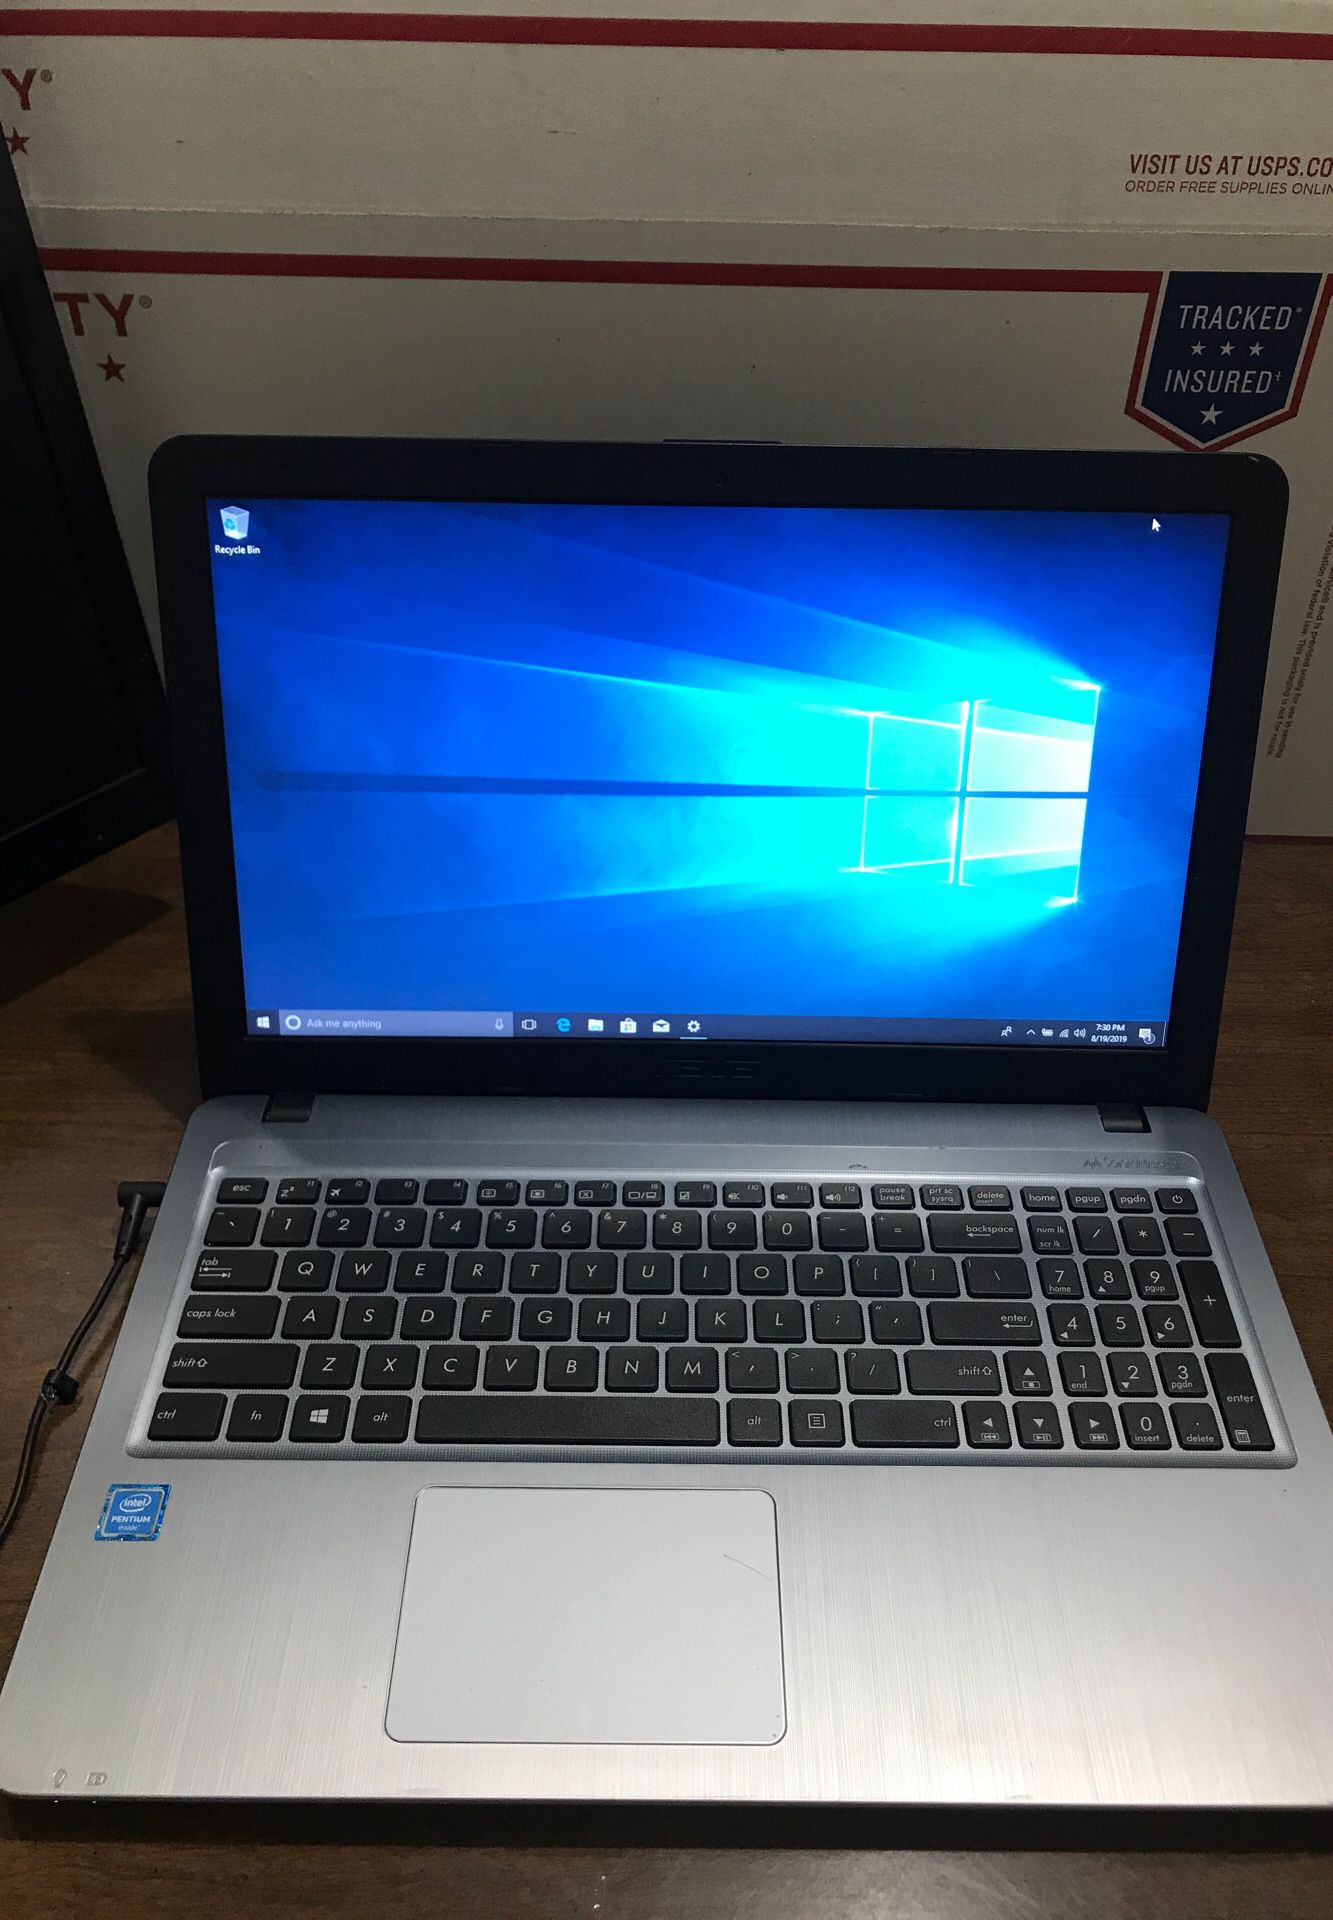 Asus x450s Laptop Windows 10 home 1 TB HDD